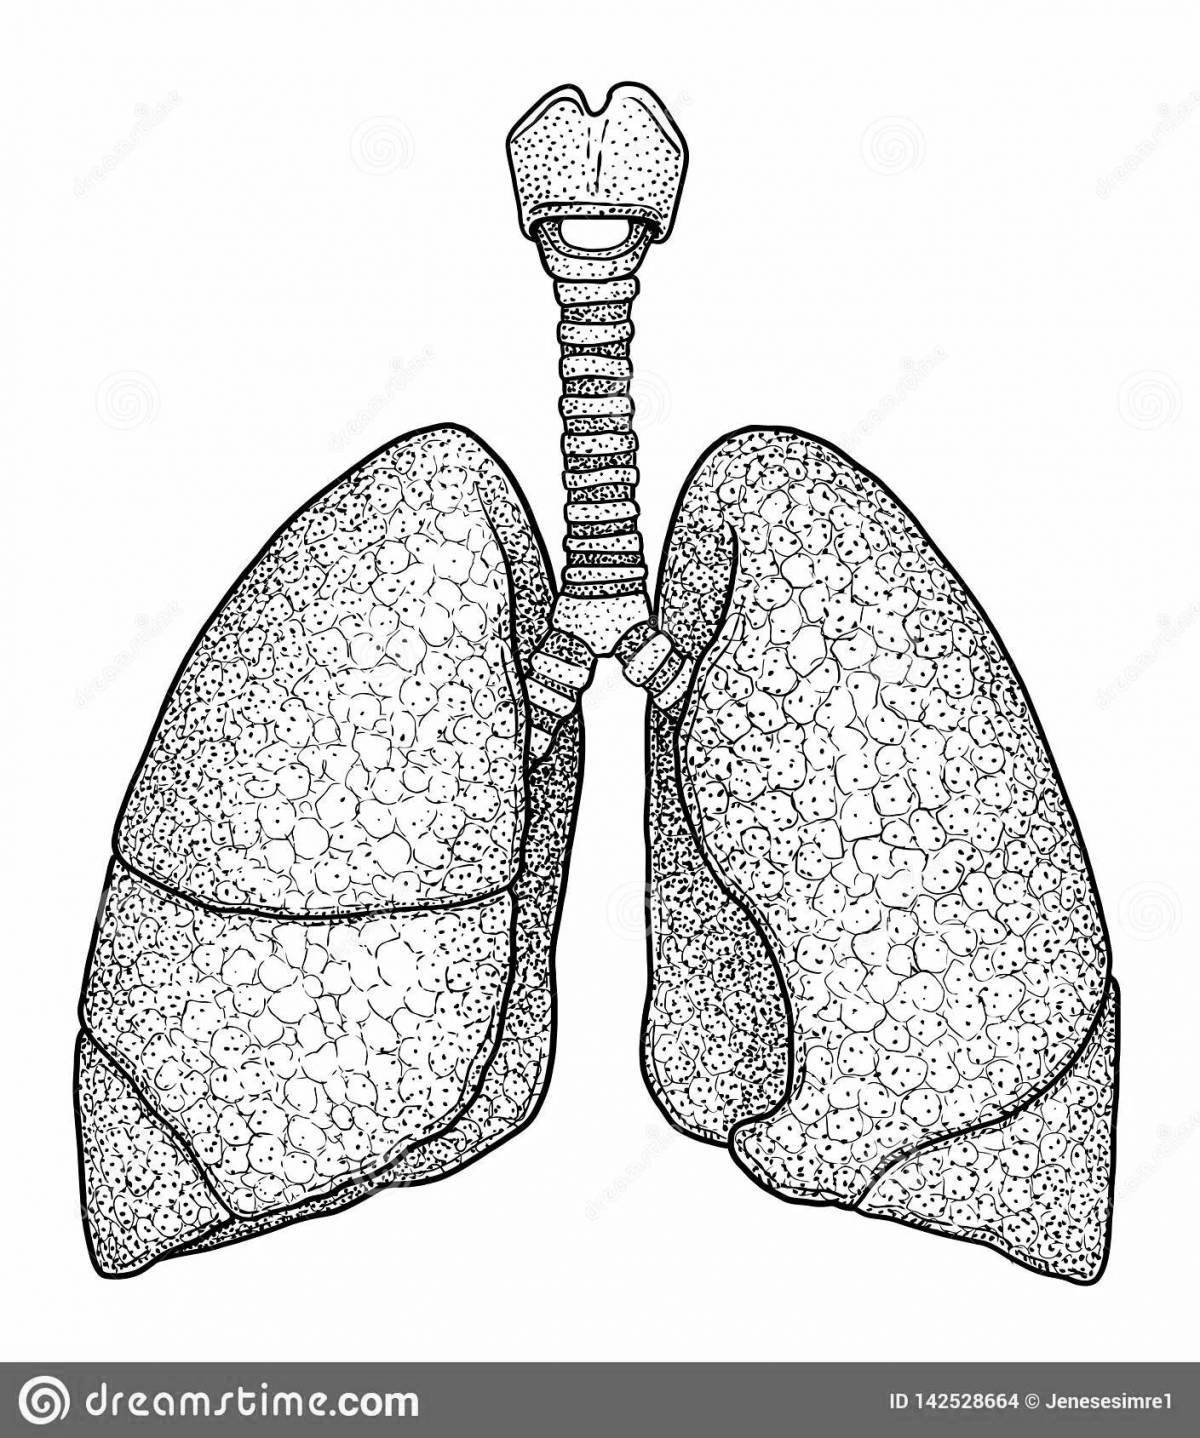 Respiratory system bright coloring page